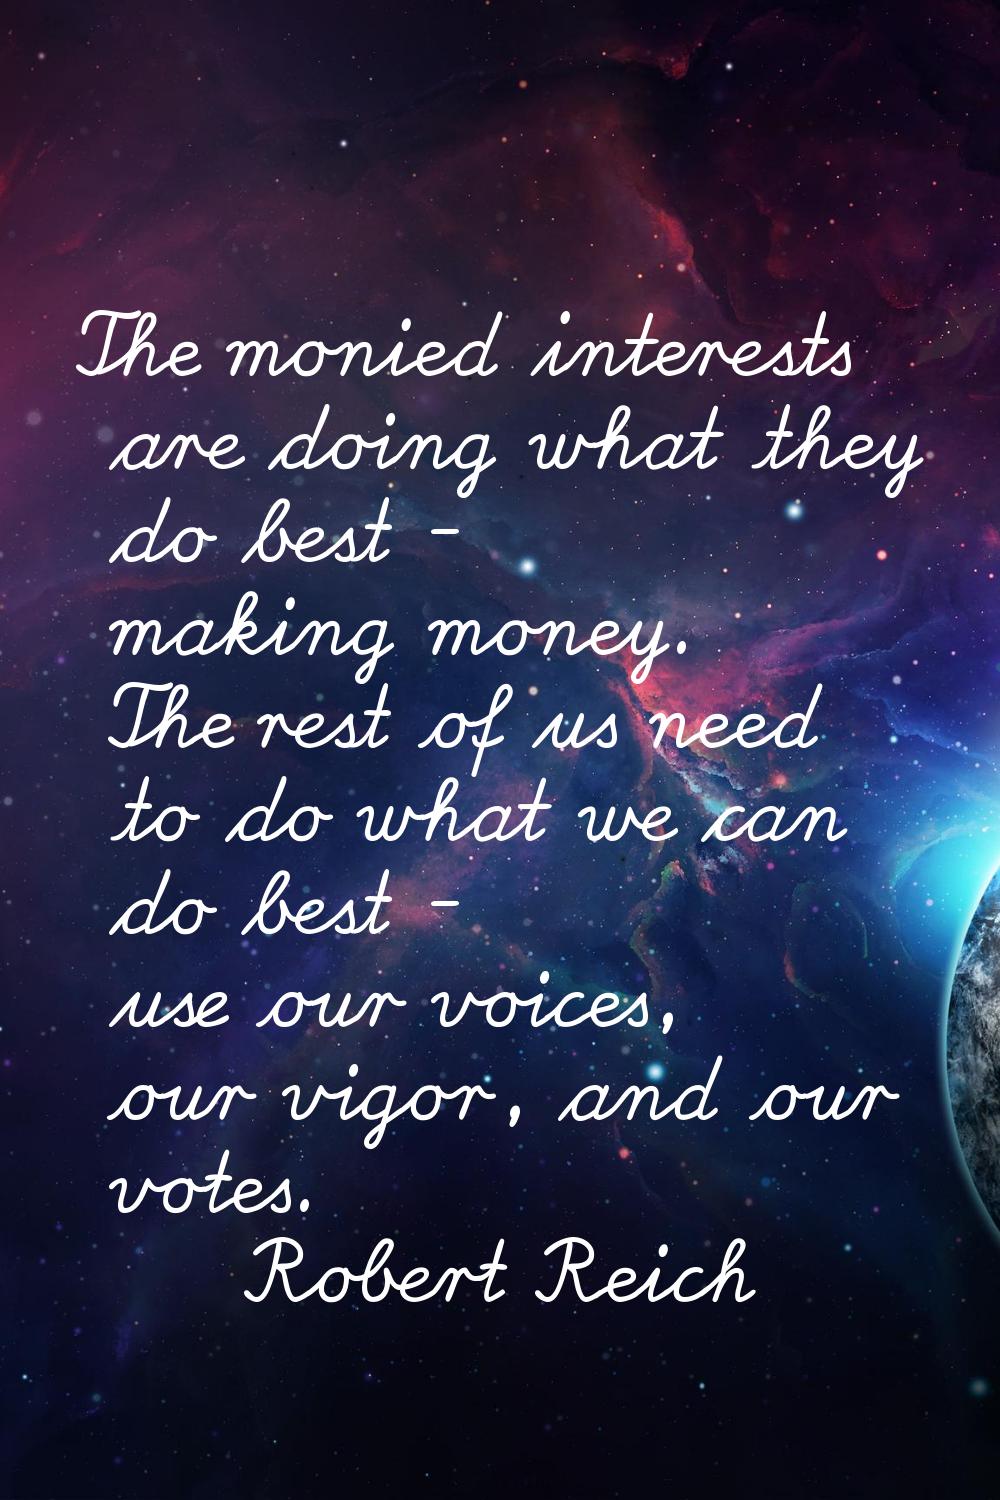 The monied interests are doing what they do best - making money. The rest of us need to do what we 